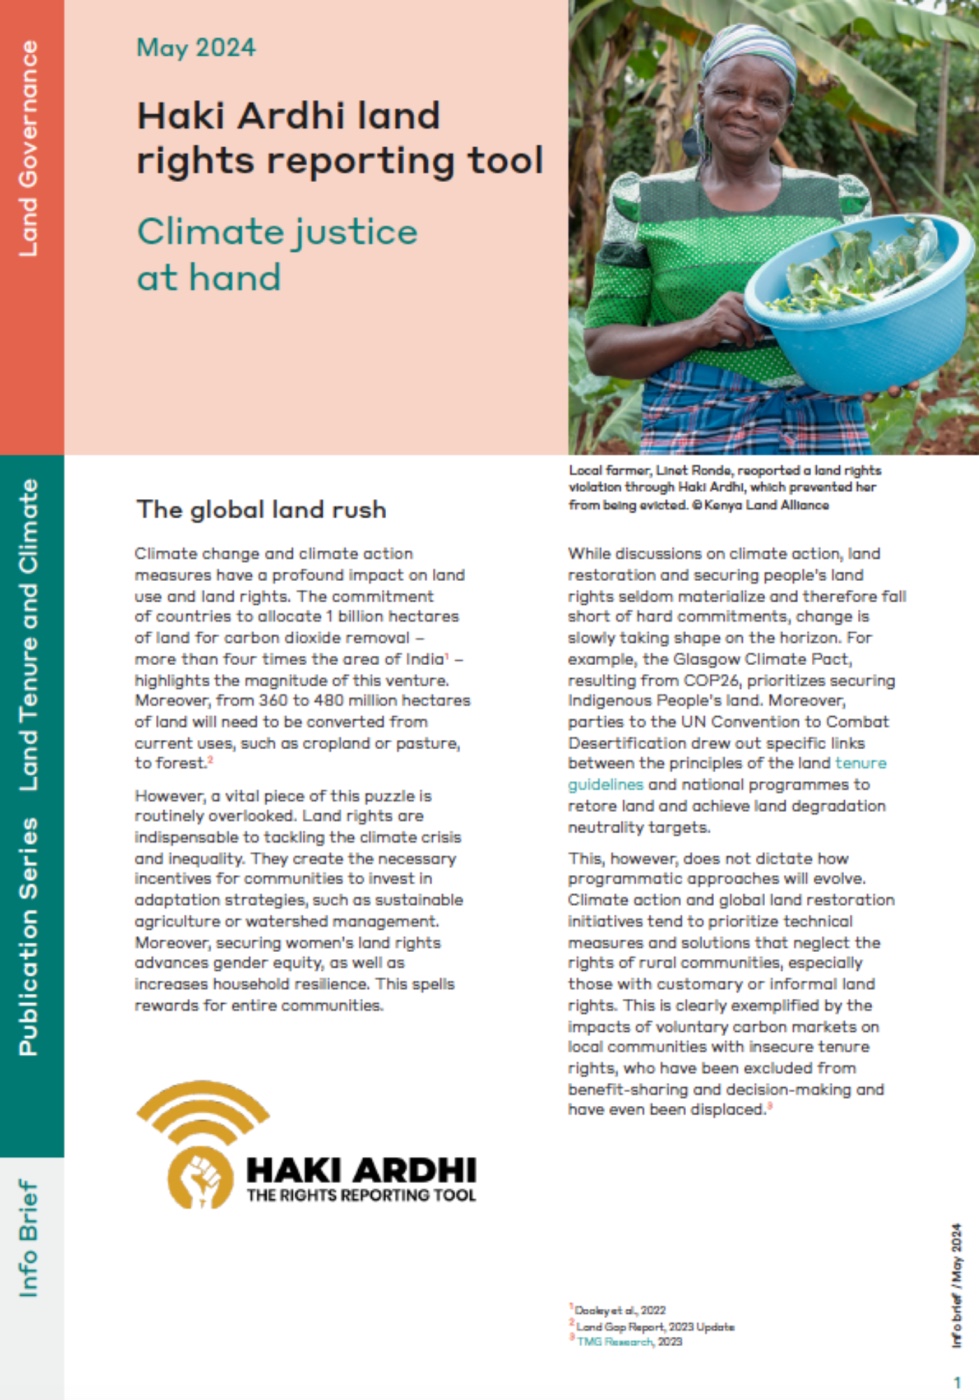 Haki Ardhi land rights reporting tool: Climate justice at hand